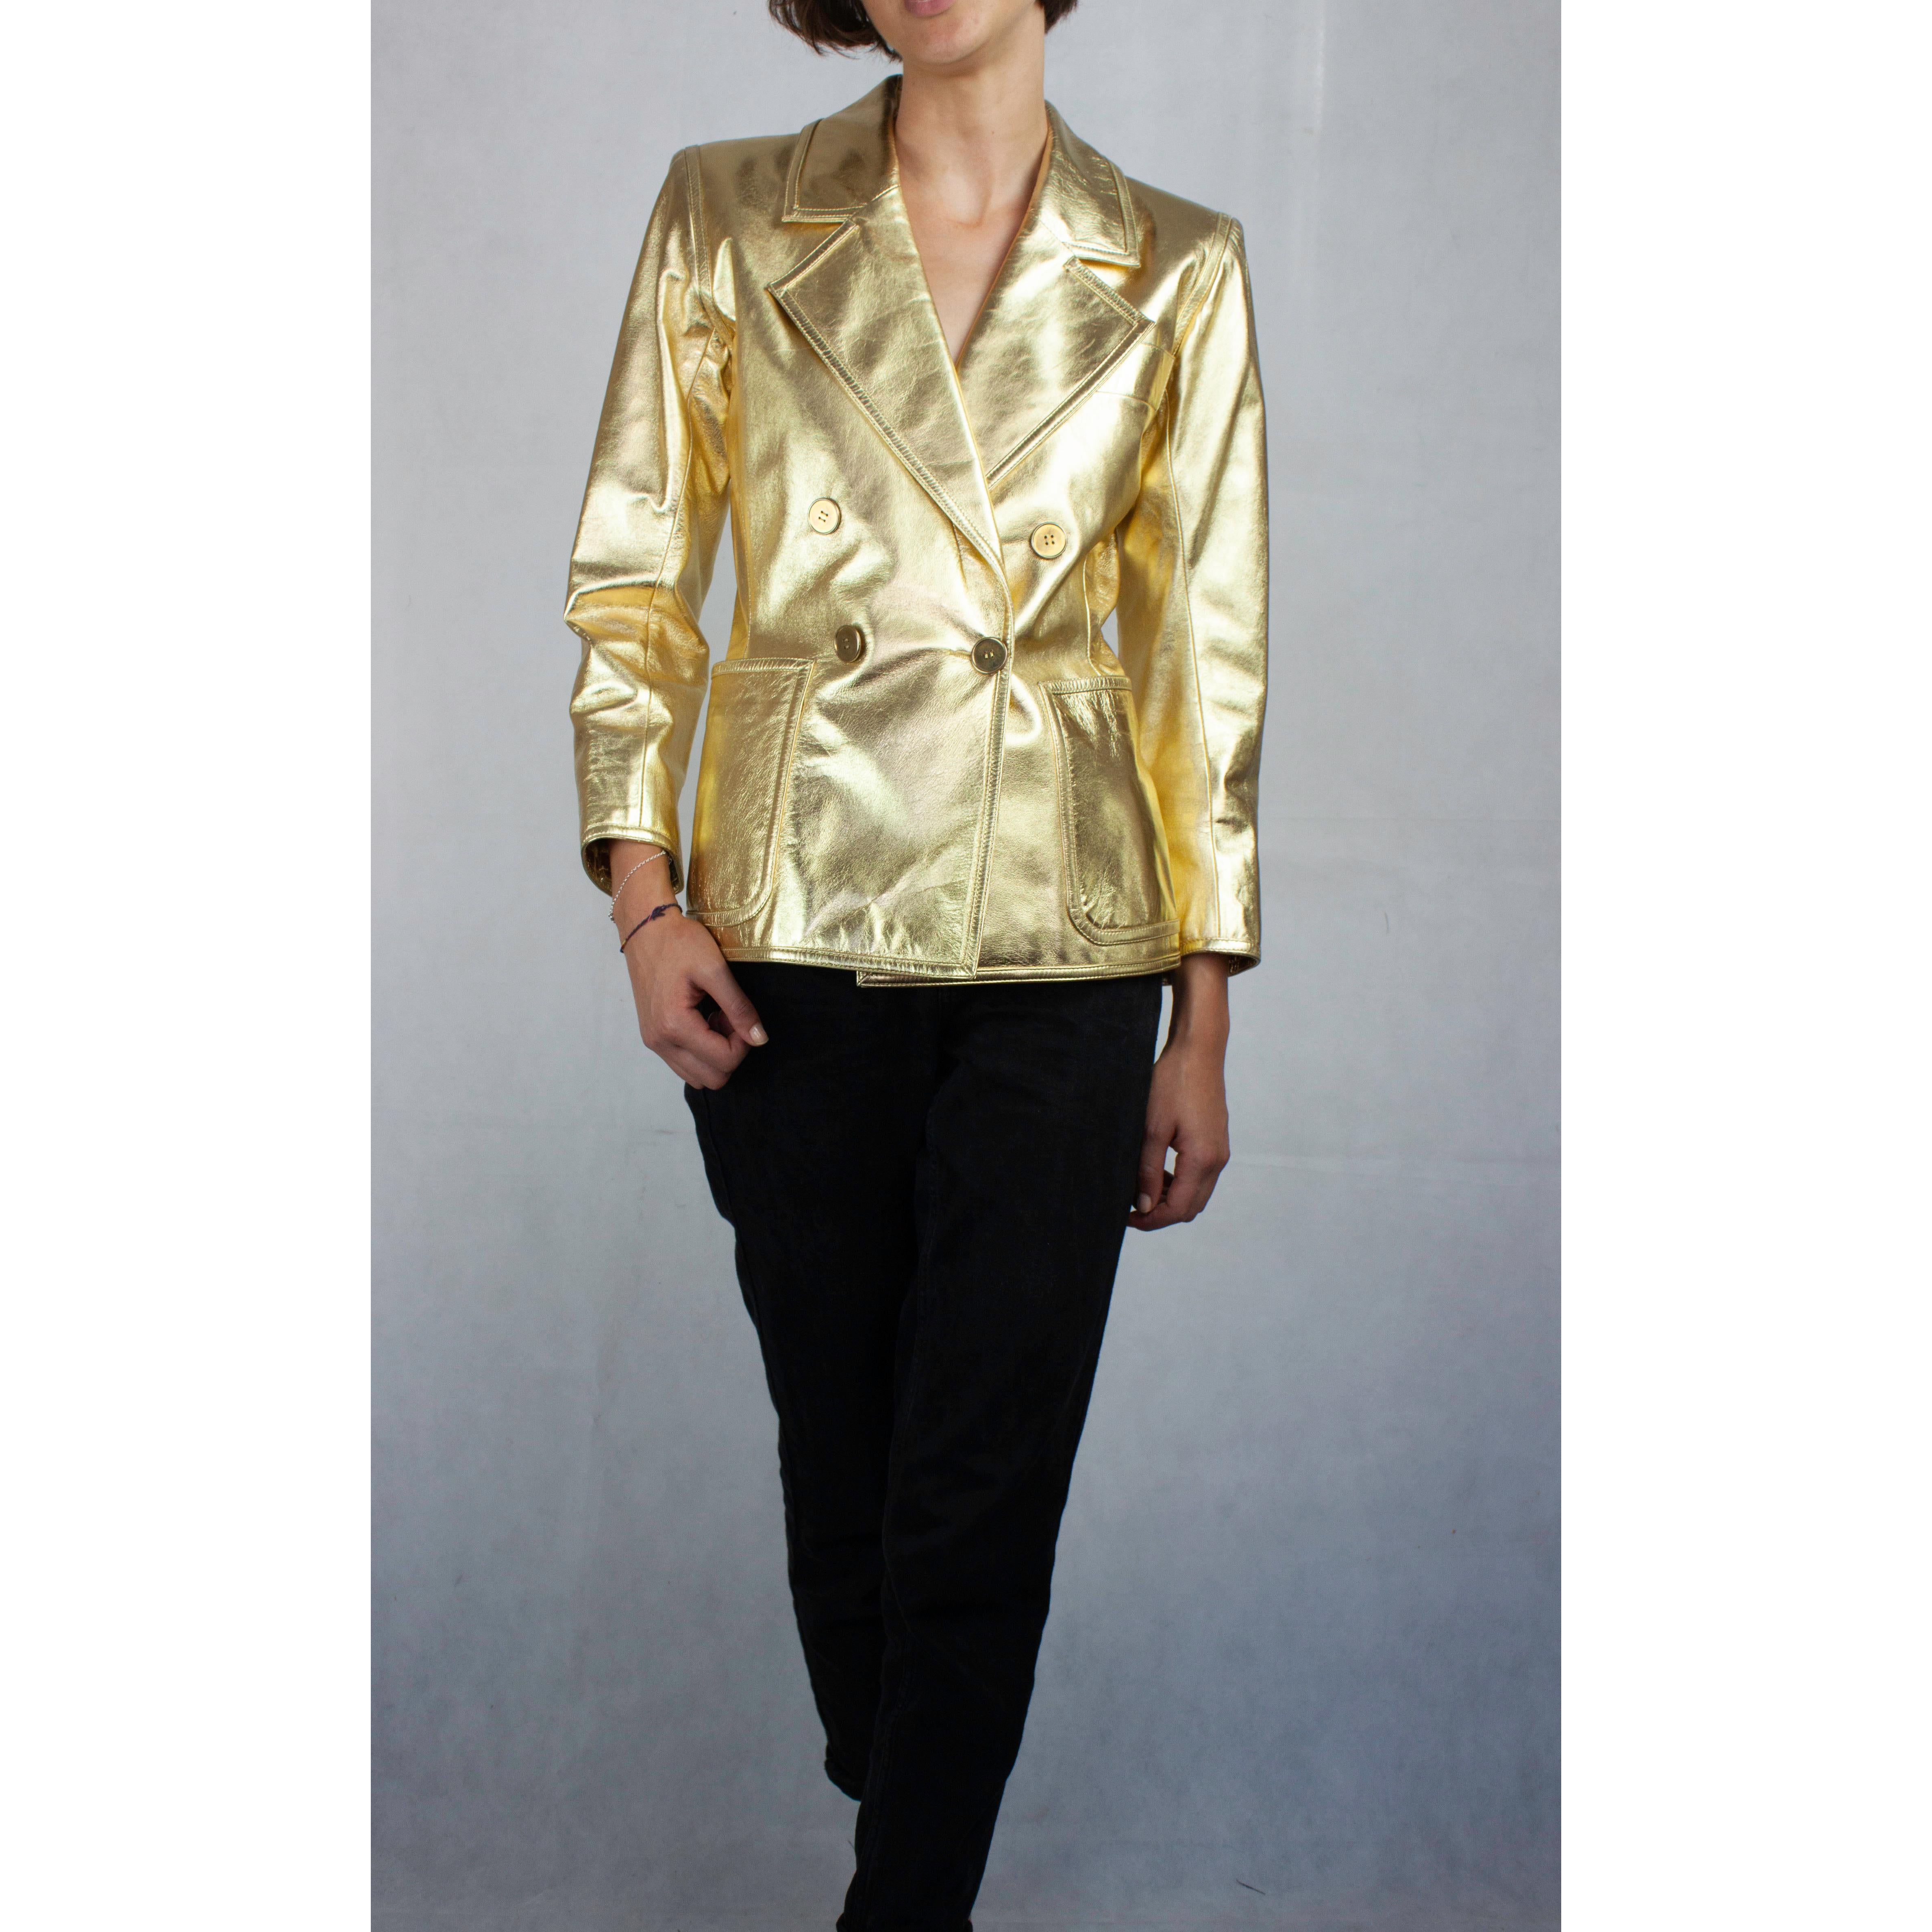 Gold Yves Saint Laurent documented  gold leather jacket. Circa 1970s